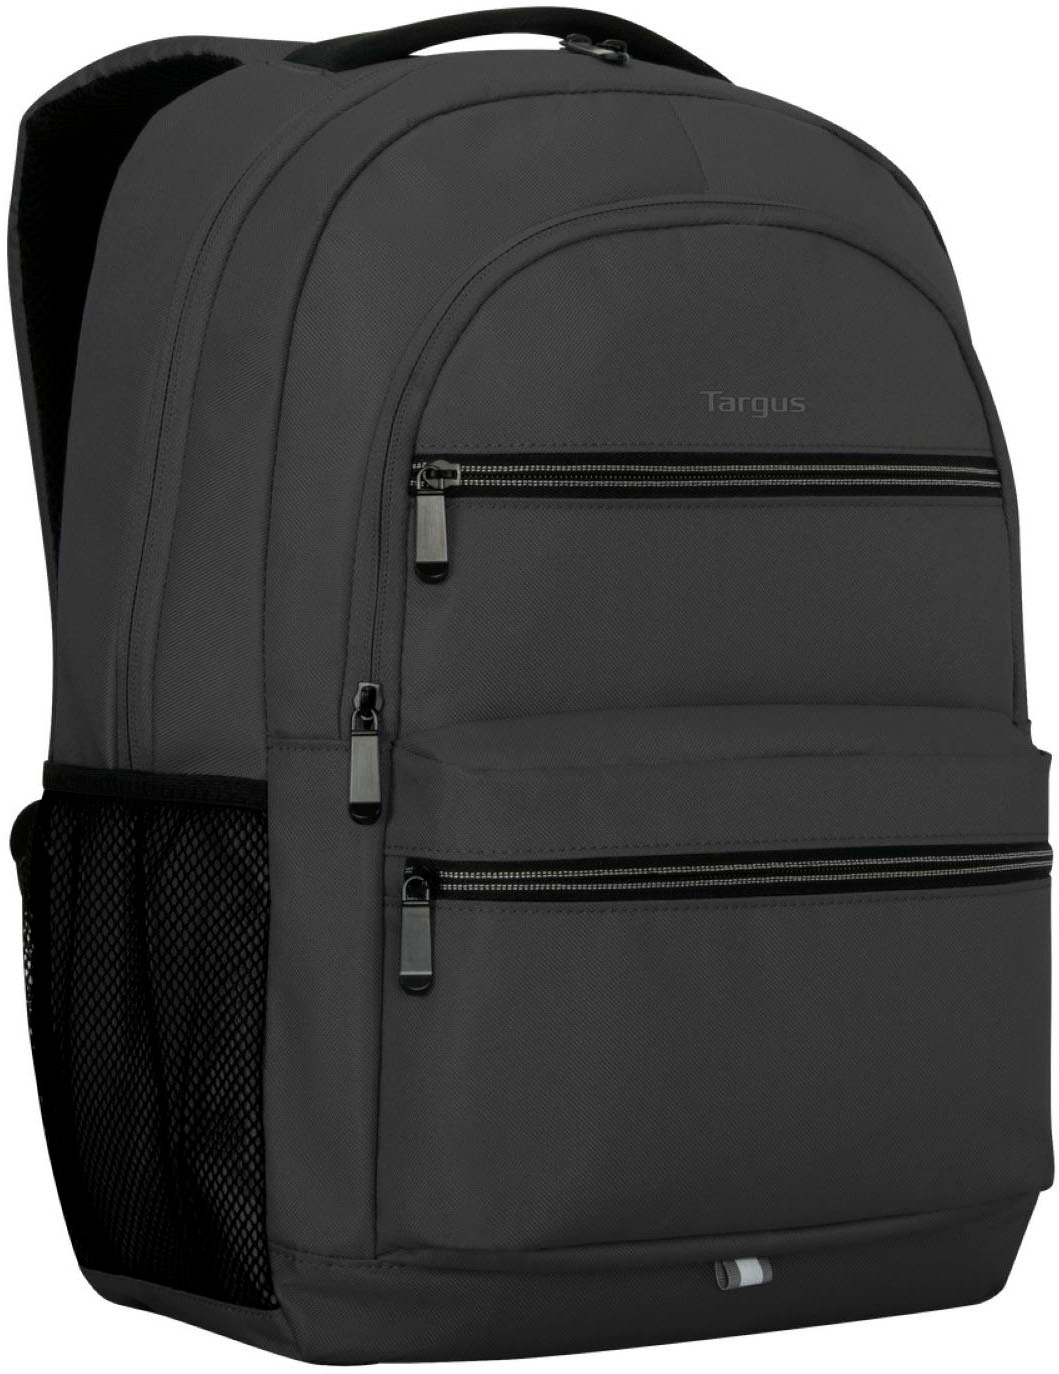 Angle View: Targus - Octave II Backpack for 15.6” Laptops - Gray